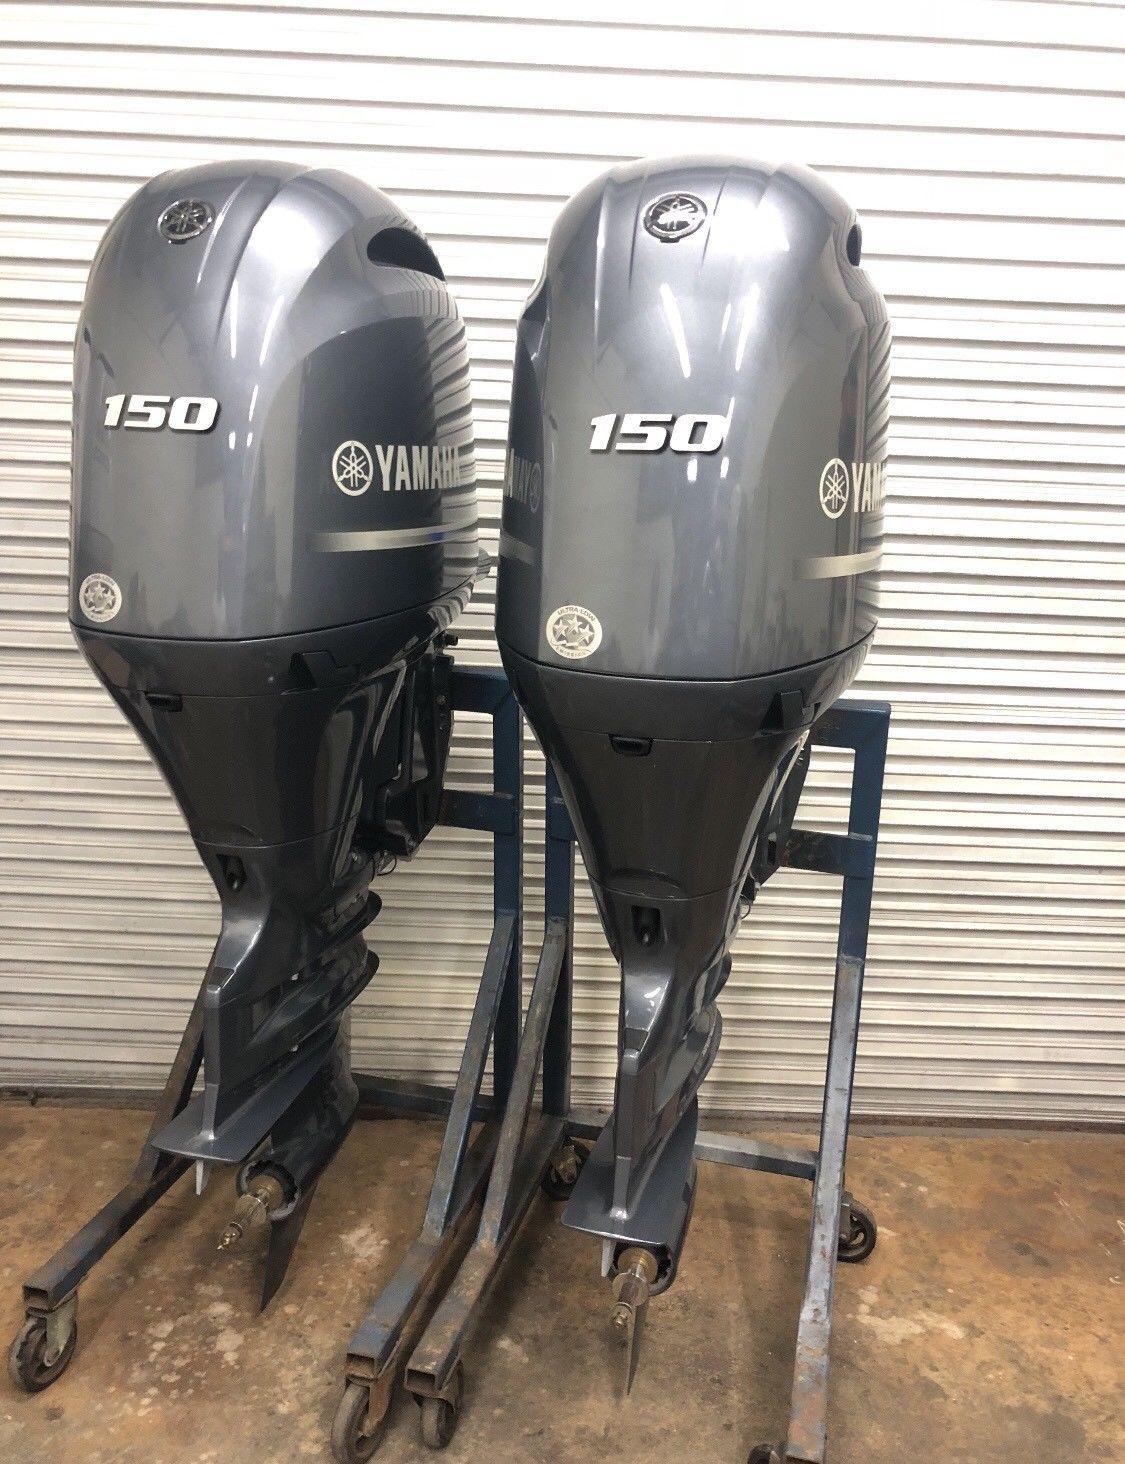 Used Pair 2017 Yamaha 150 HP 4-Stroke Outboard Motor 25" (X)